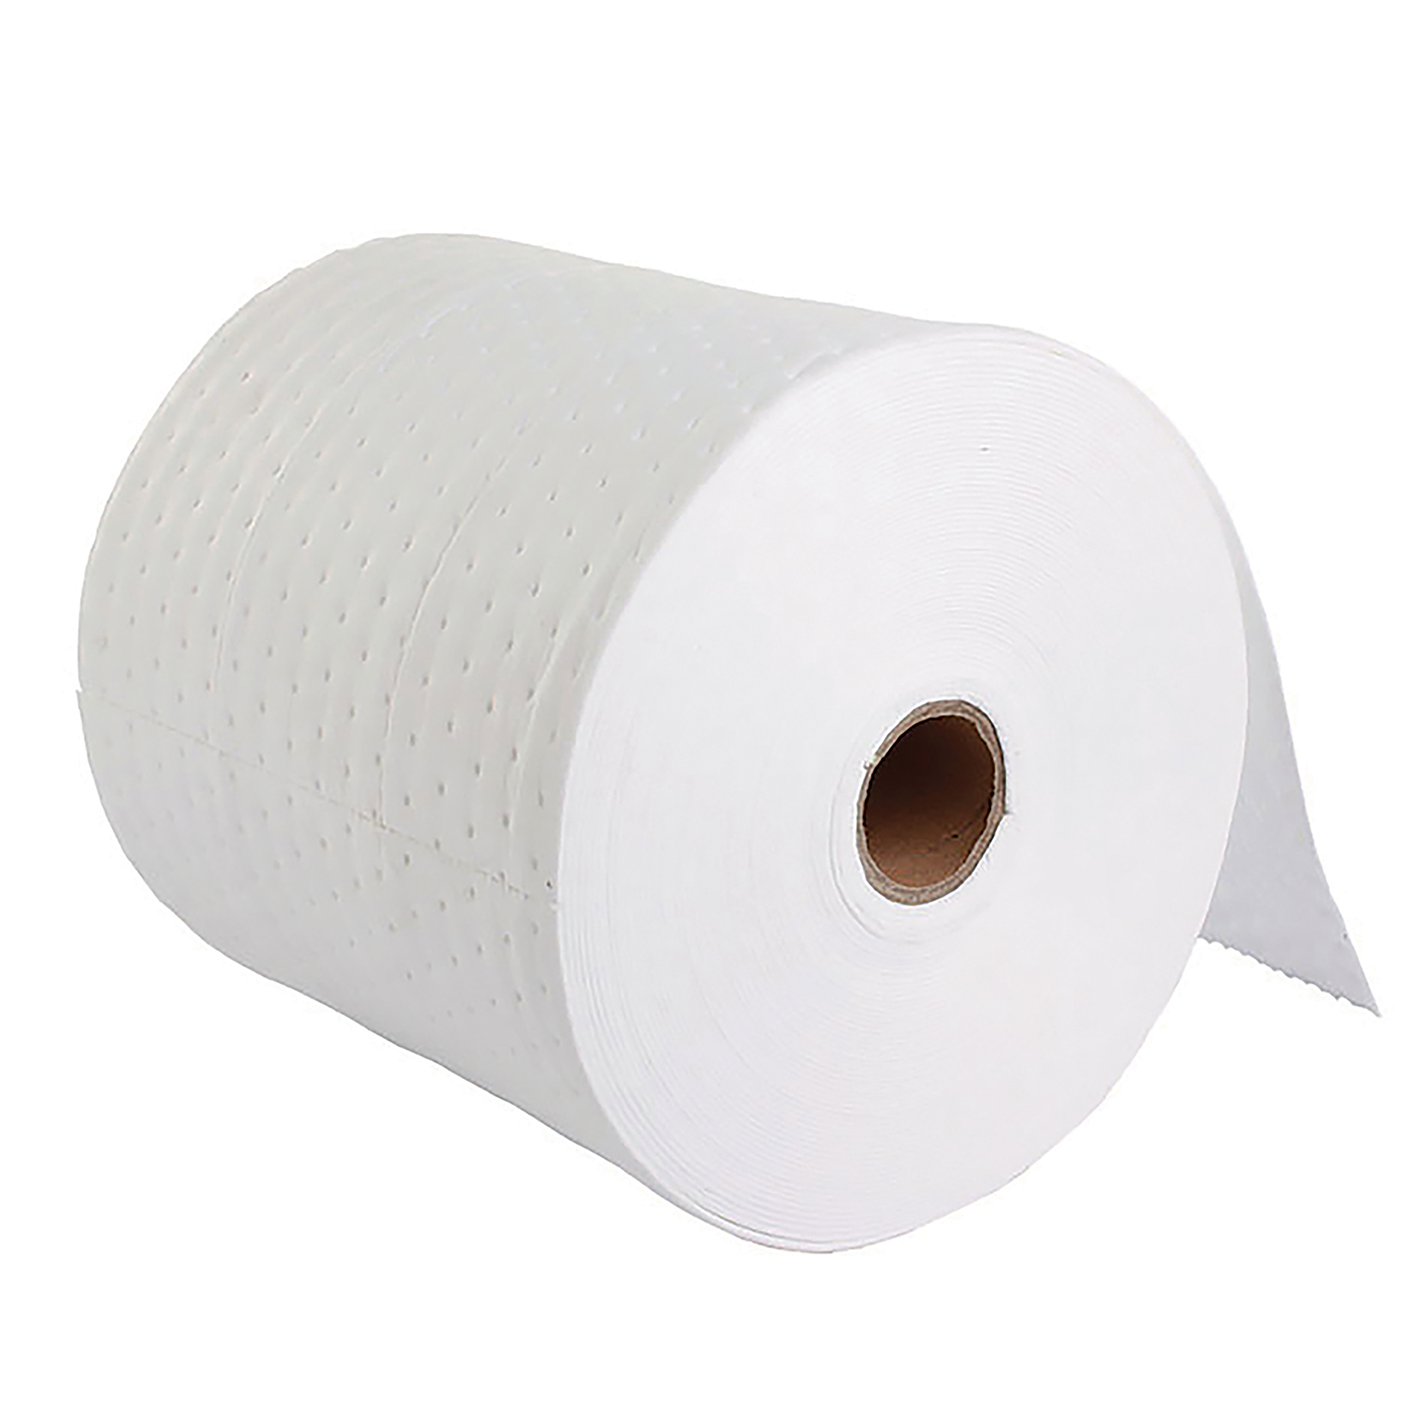 Oil Only Absorbent Roll96cm x 45m